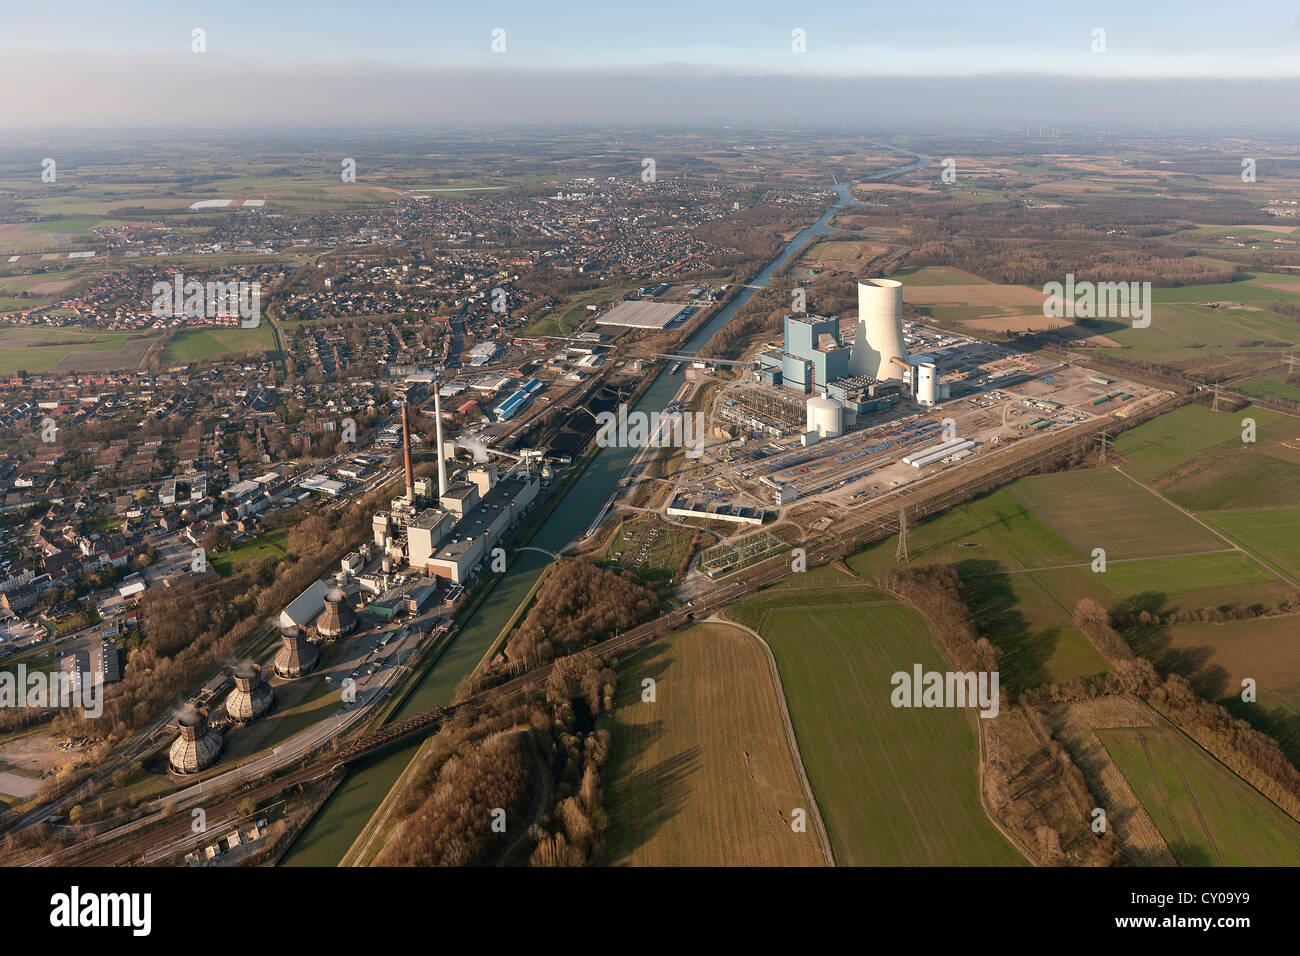 Aerial view, EON Datteln 4, newly constructed and older coal-fired power plants, Datteln, Ruhr area, North Rhine-Westphalia Stock Photo